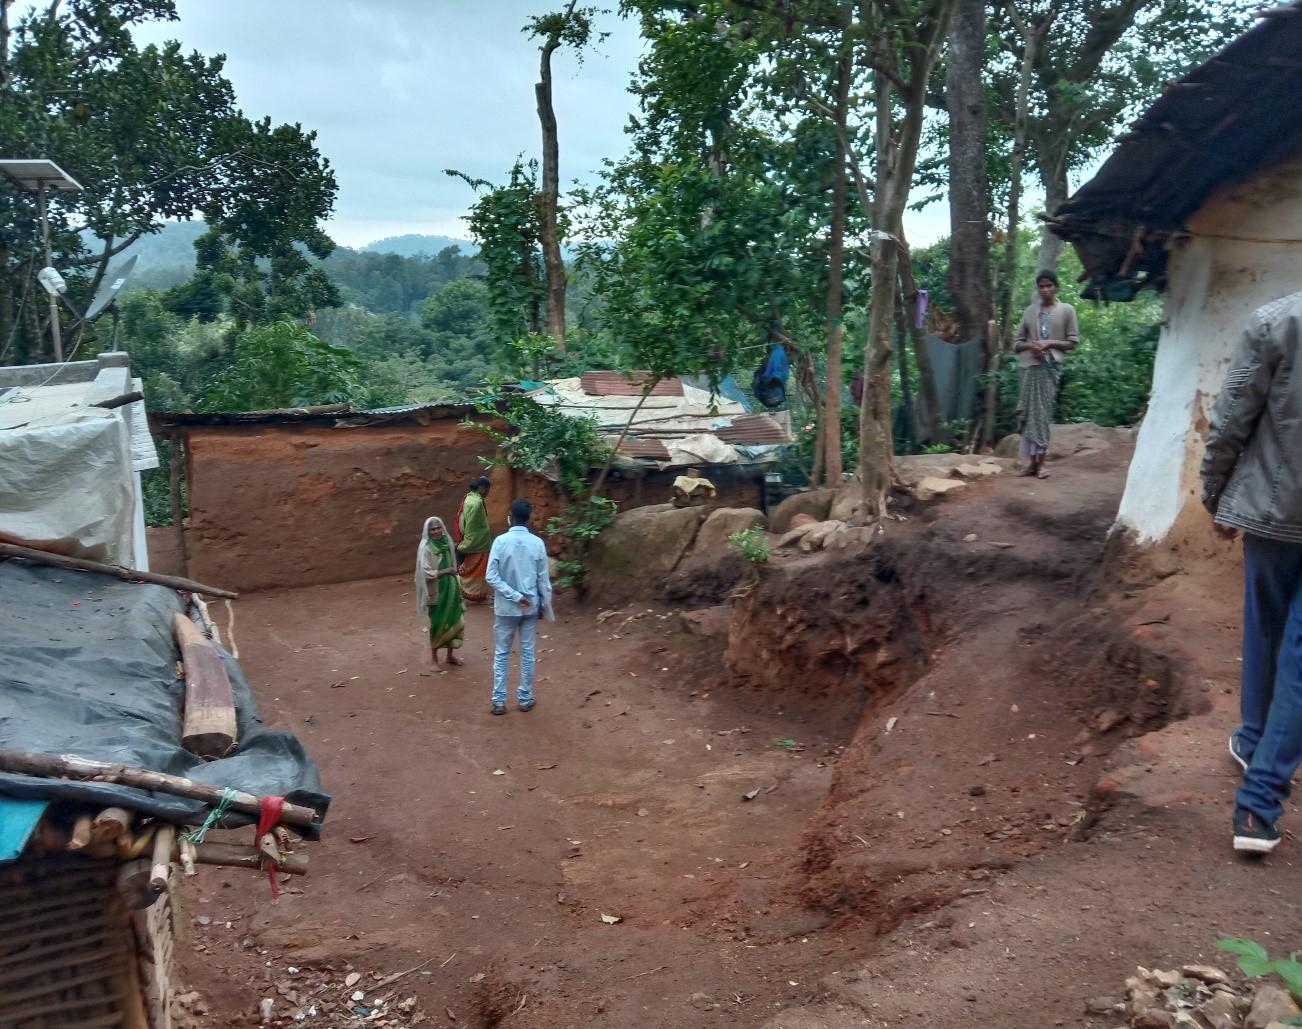 Glimpse of a village within forests where tribal people reside